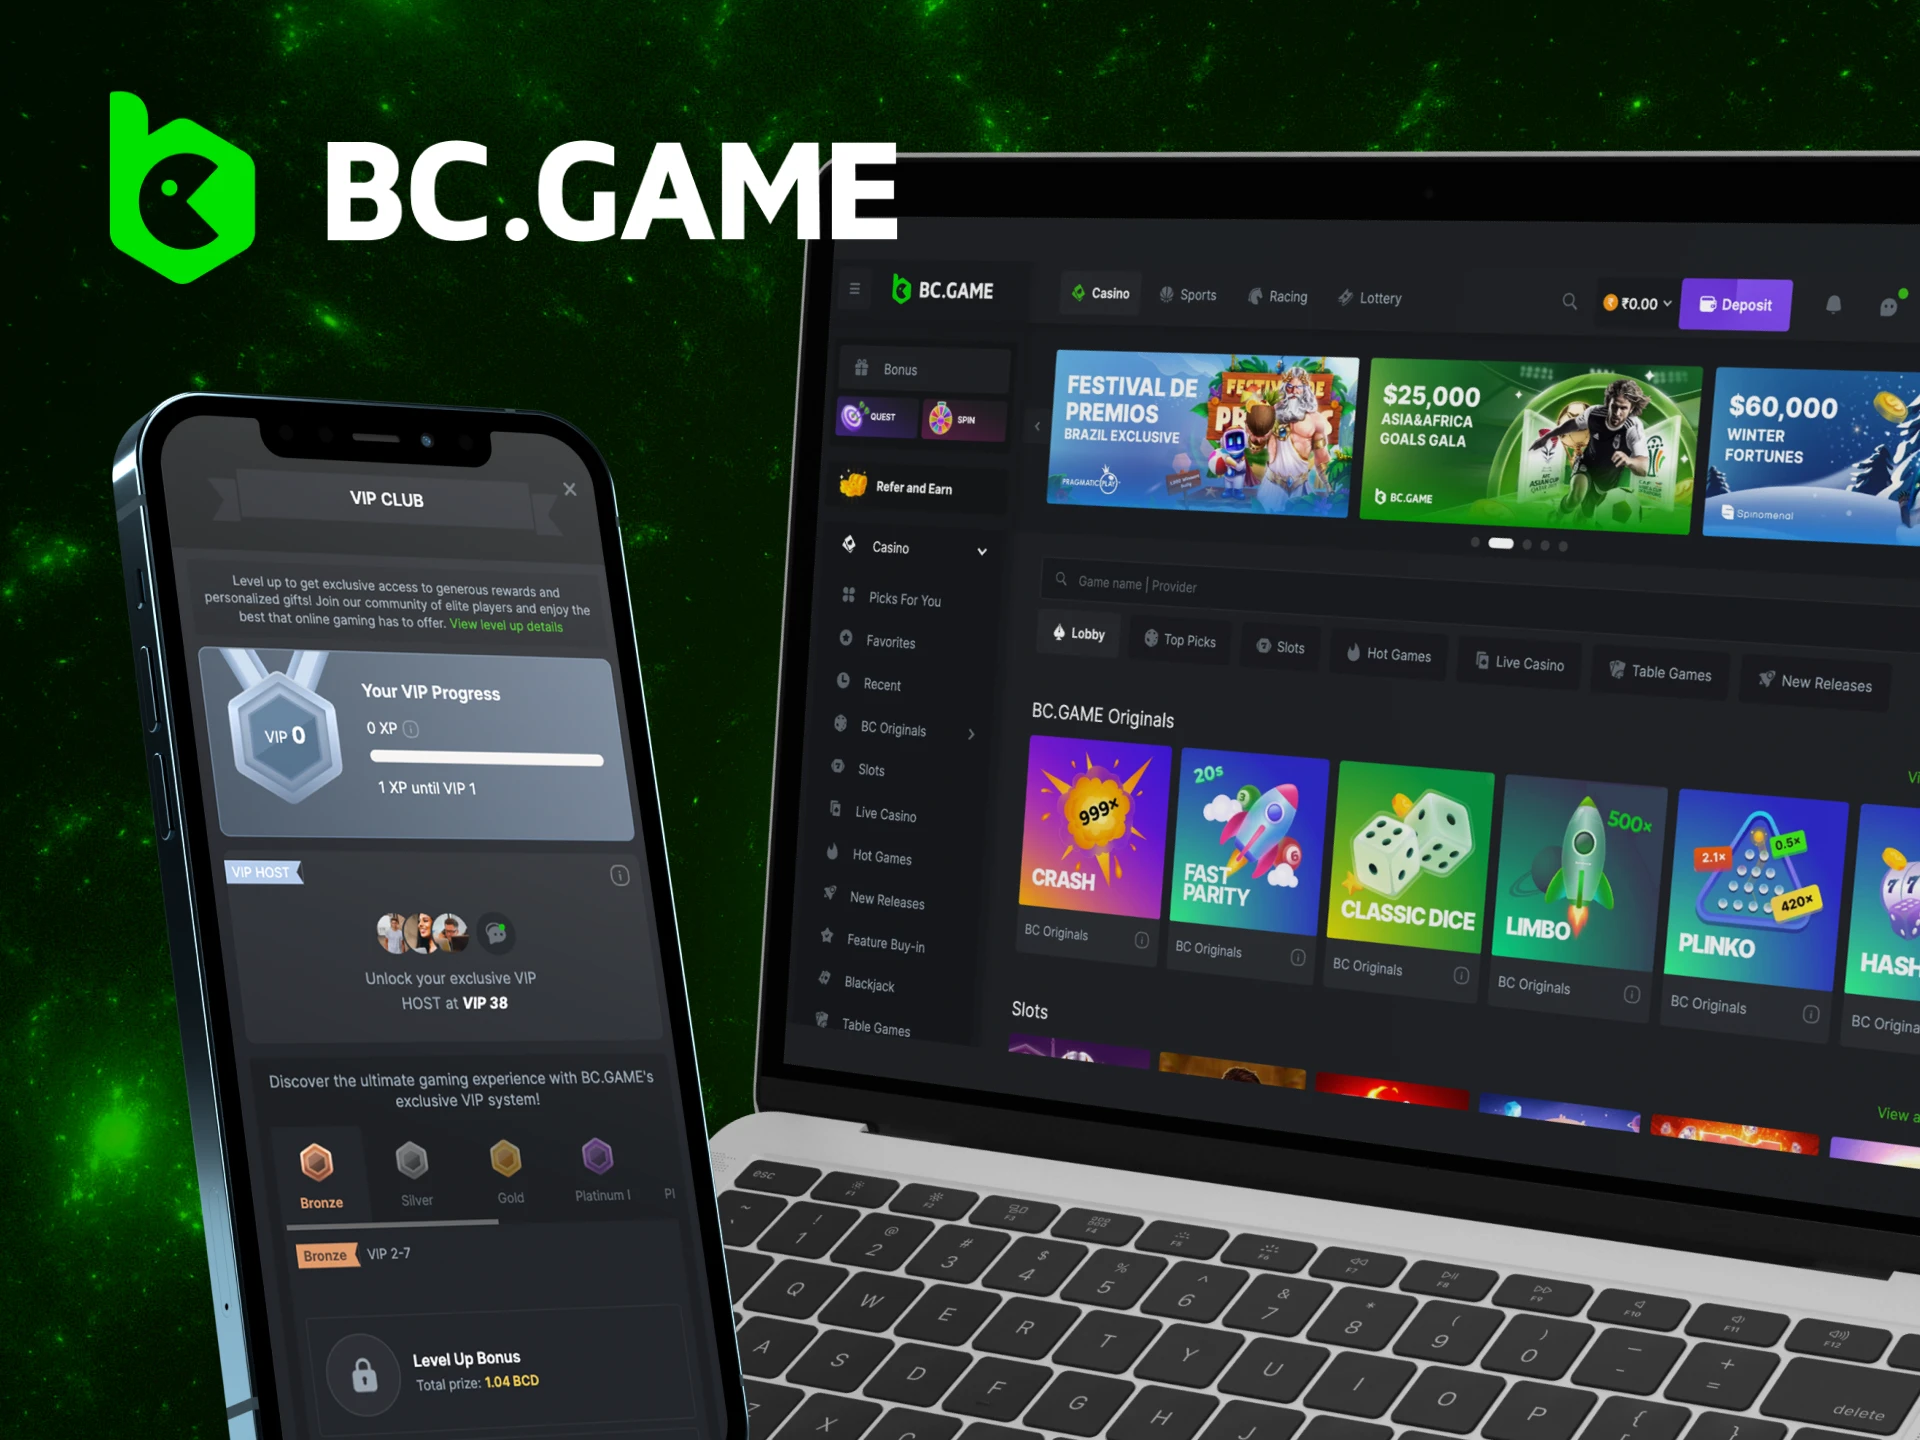 Users of the BC Game website can receive unique bonuses, be a member of the VIP club, invite a friend and benefit from them.